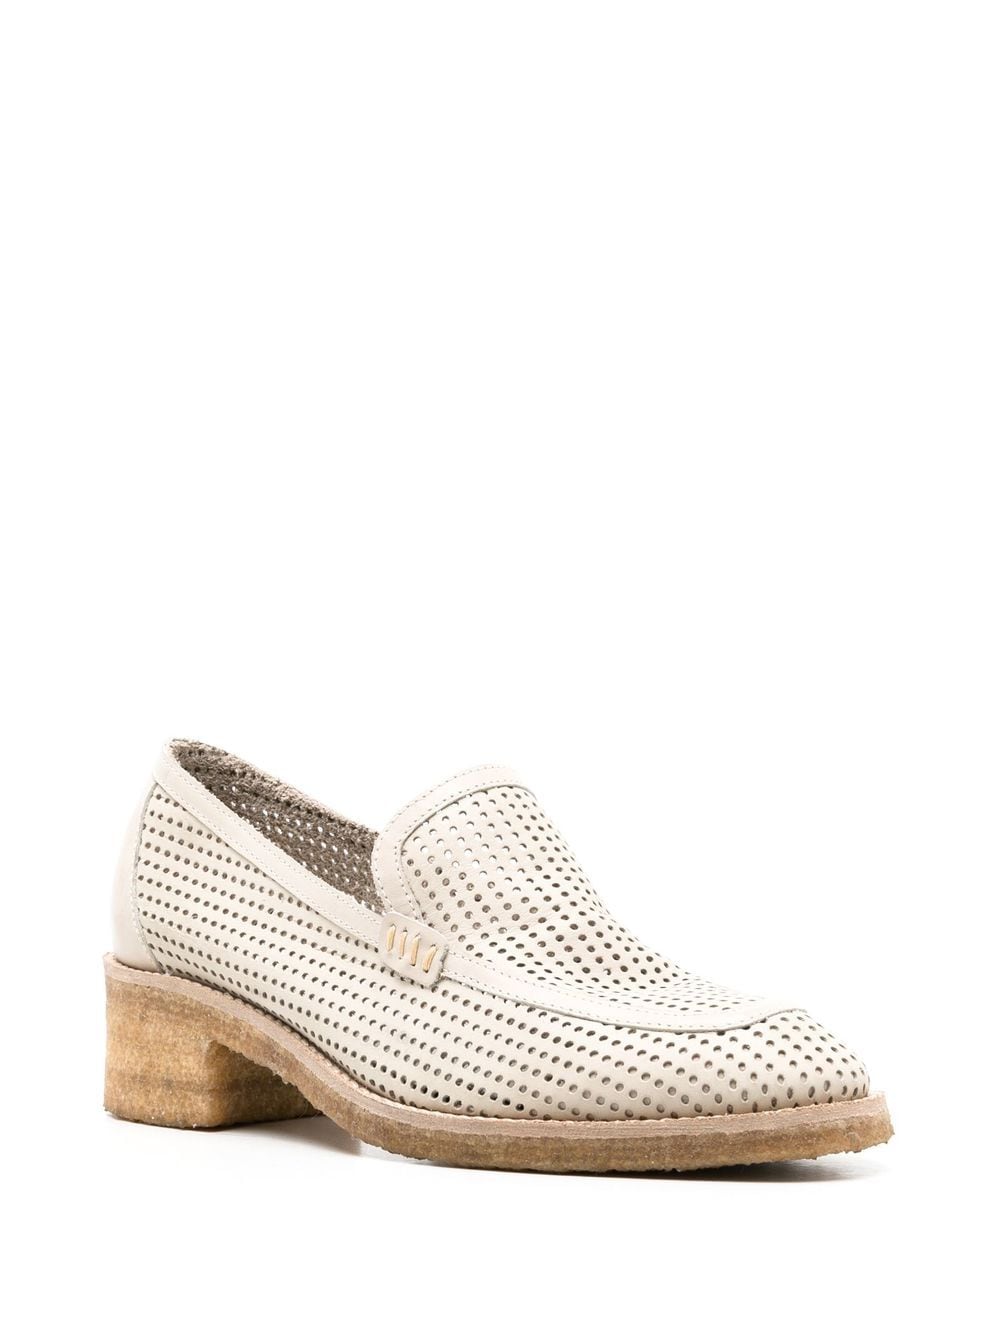 Shop Sarah Chofakian Ronnie Perforated Oxford Shoes In Neutrals